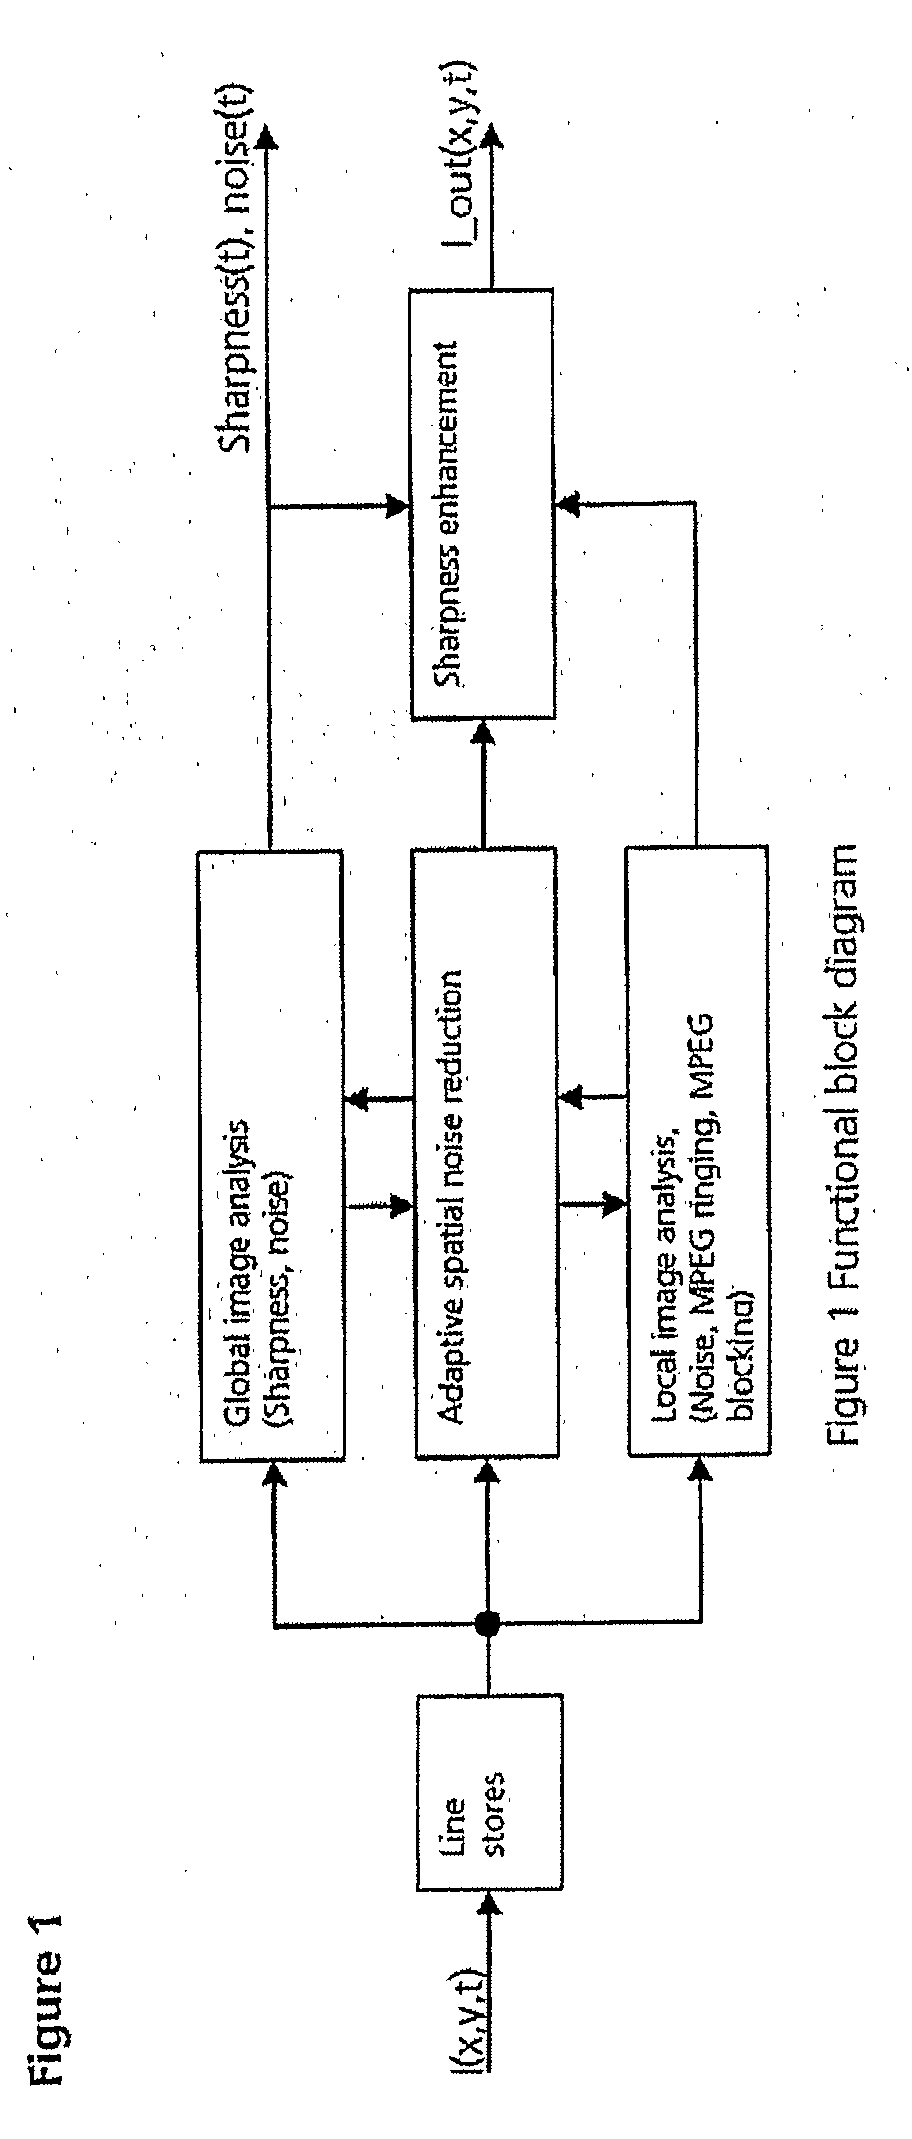 Filter for adaptive noise reduction and sharpness enhancement for electronically displayed pictures